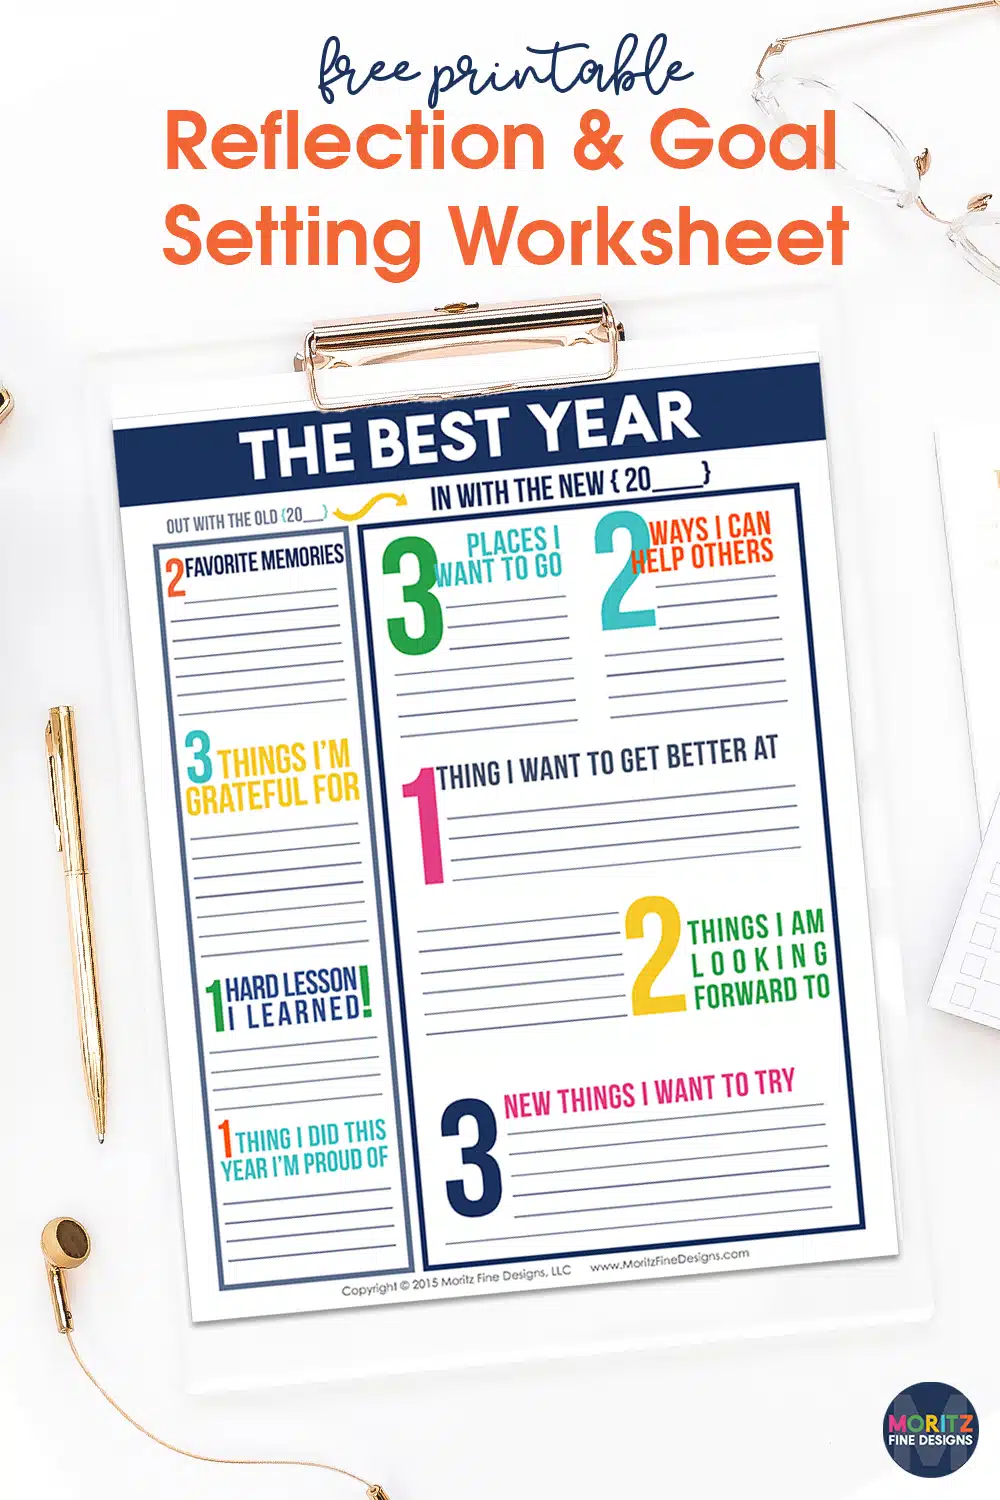 Take time to reflect on the past year and set goals for the new year using the Goal Setting Worksheet. Download now for free, it's great for kids & adults!